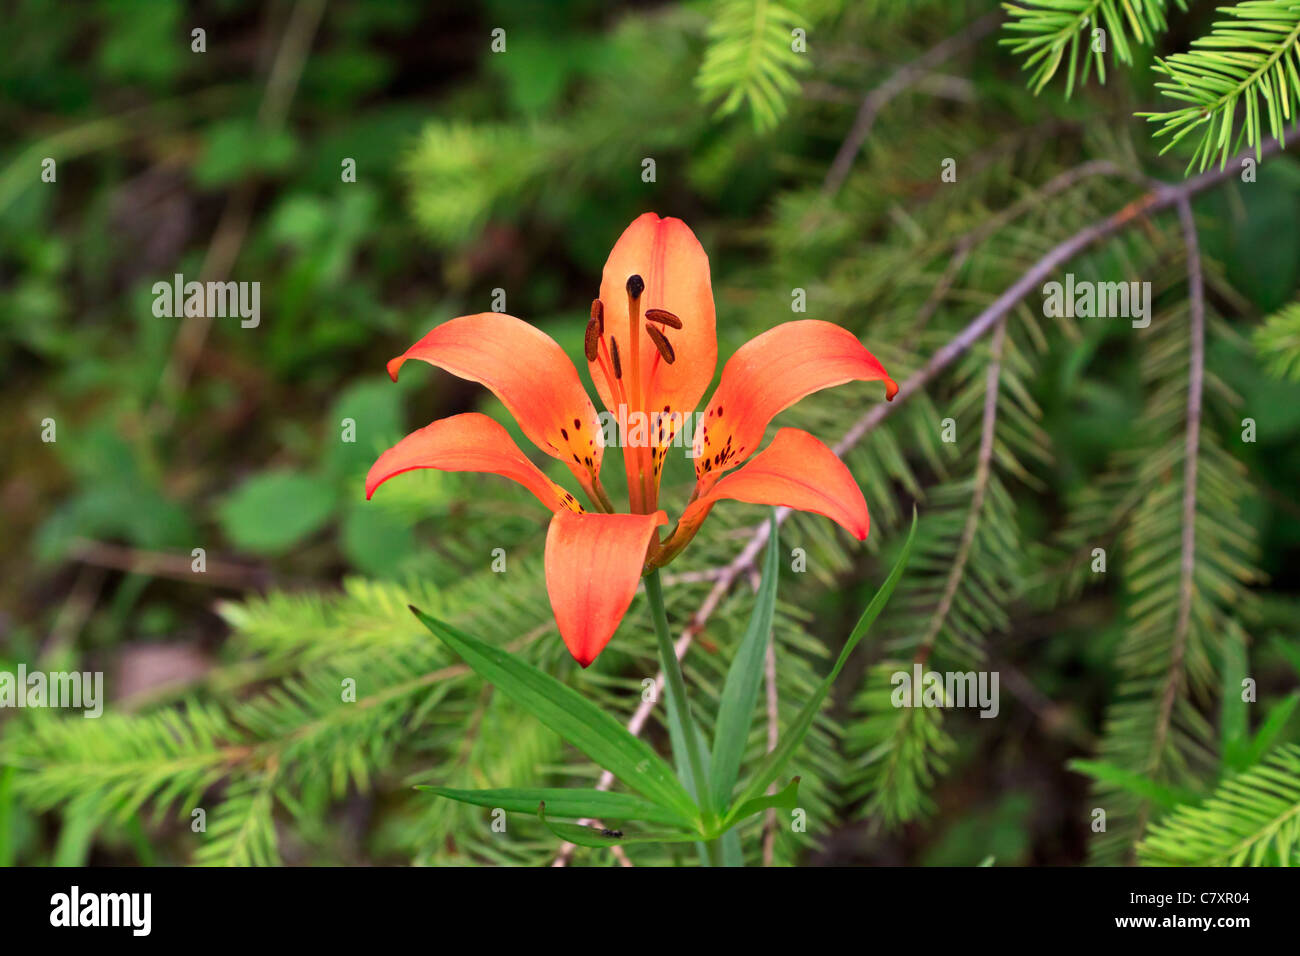 Wood lily, Lilium philadelphicum growing wild in the Columbia Valley, British Columbia, Canada Stock Photo